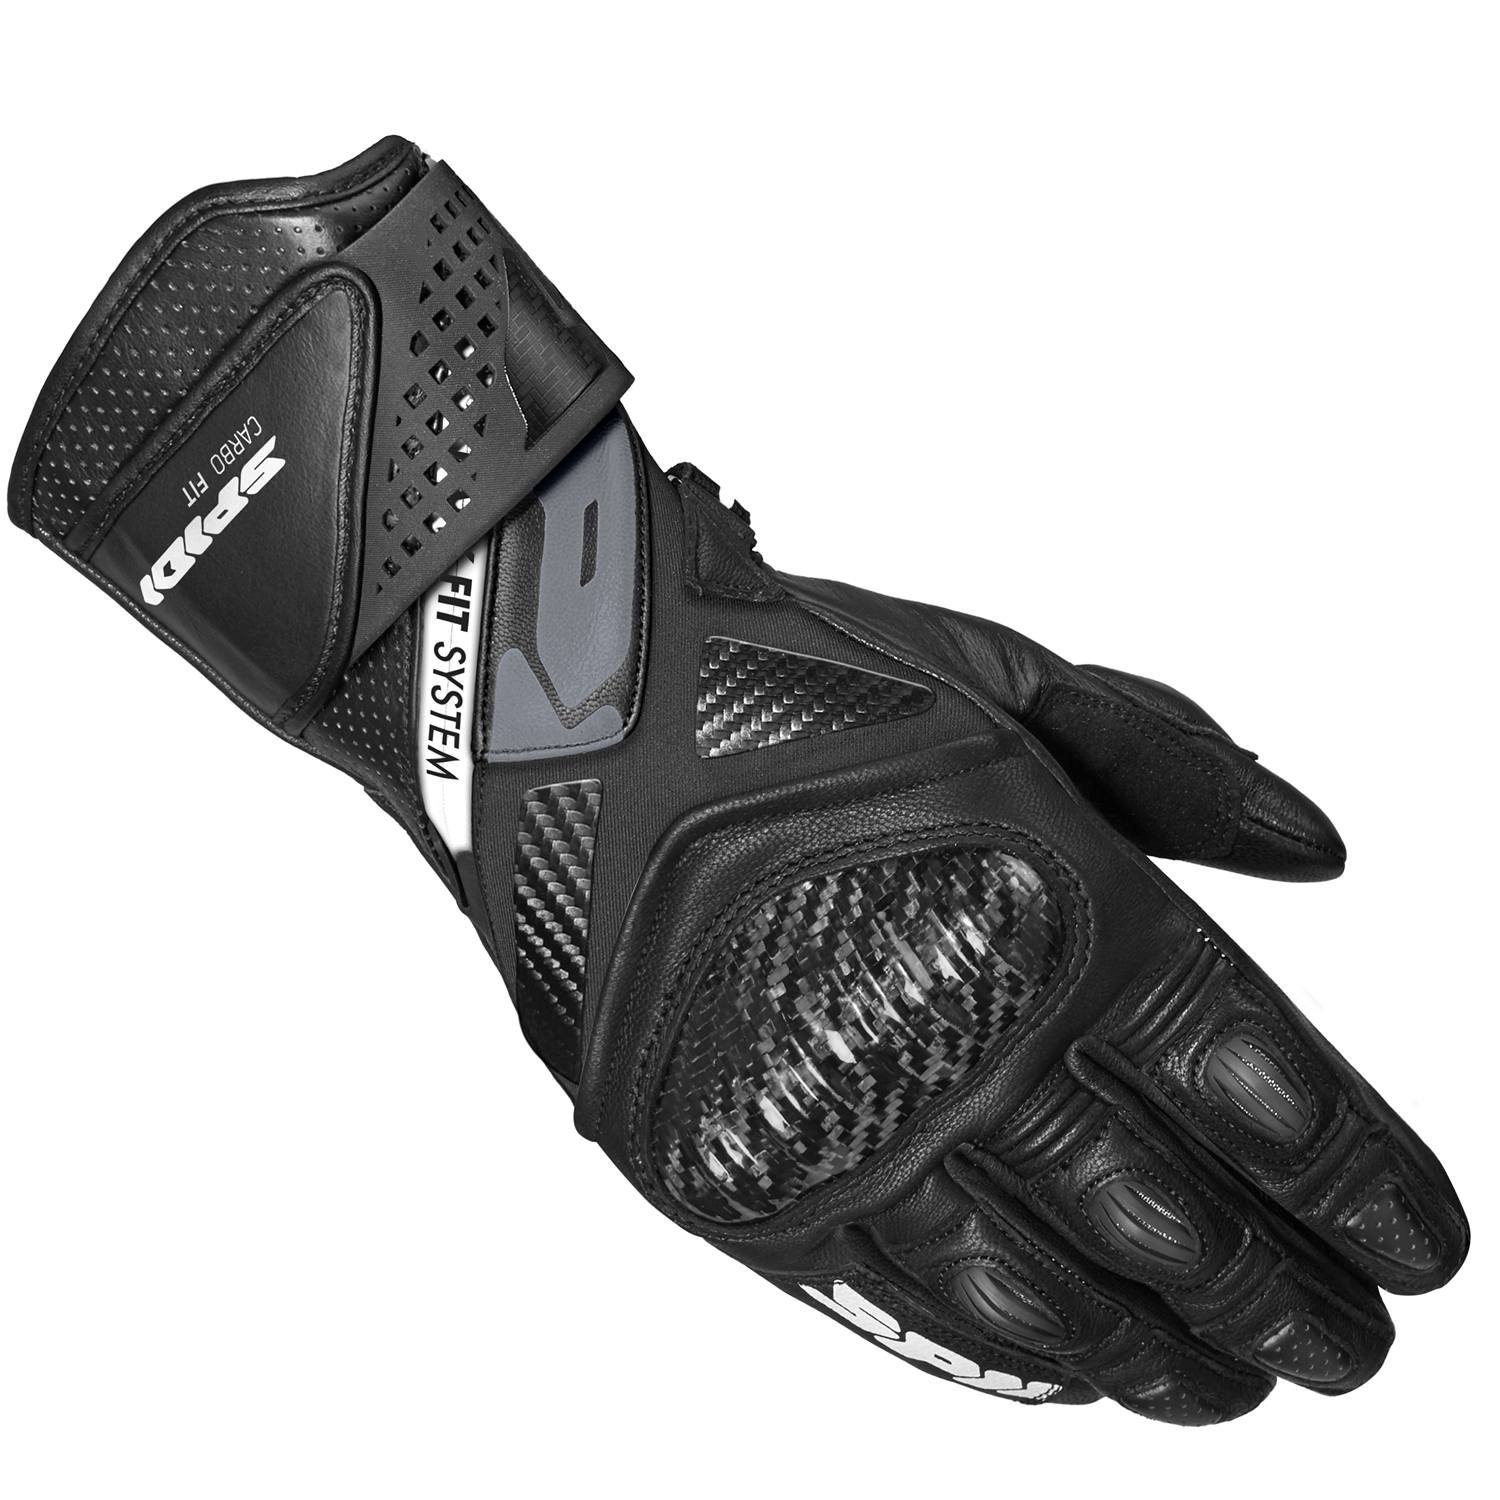 Image of Spidi Carbo Fit Gloves Black Talla 3XL